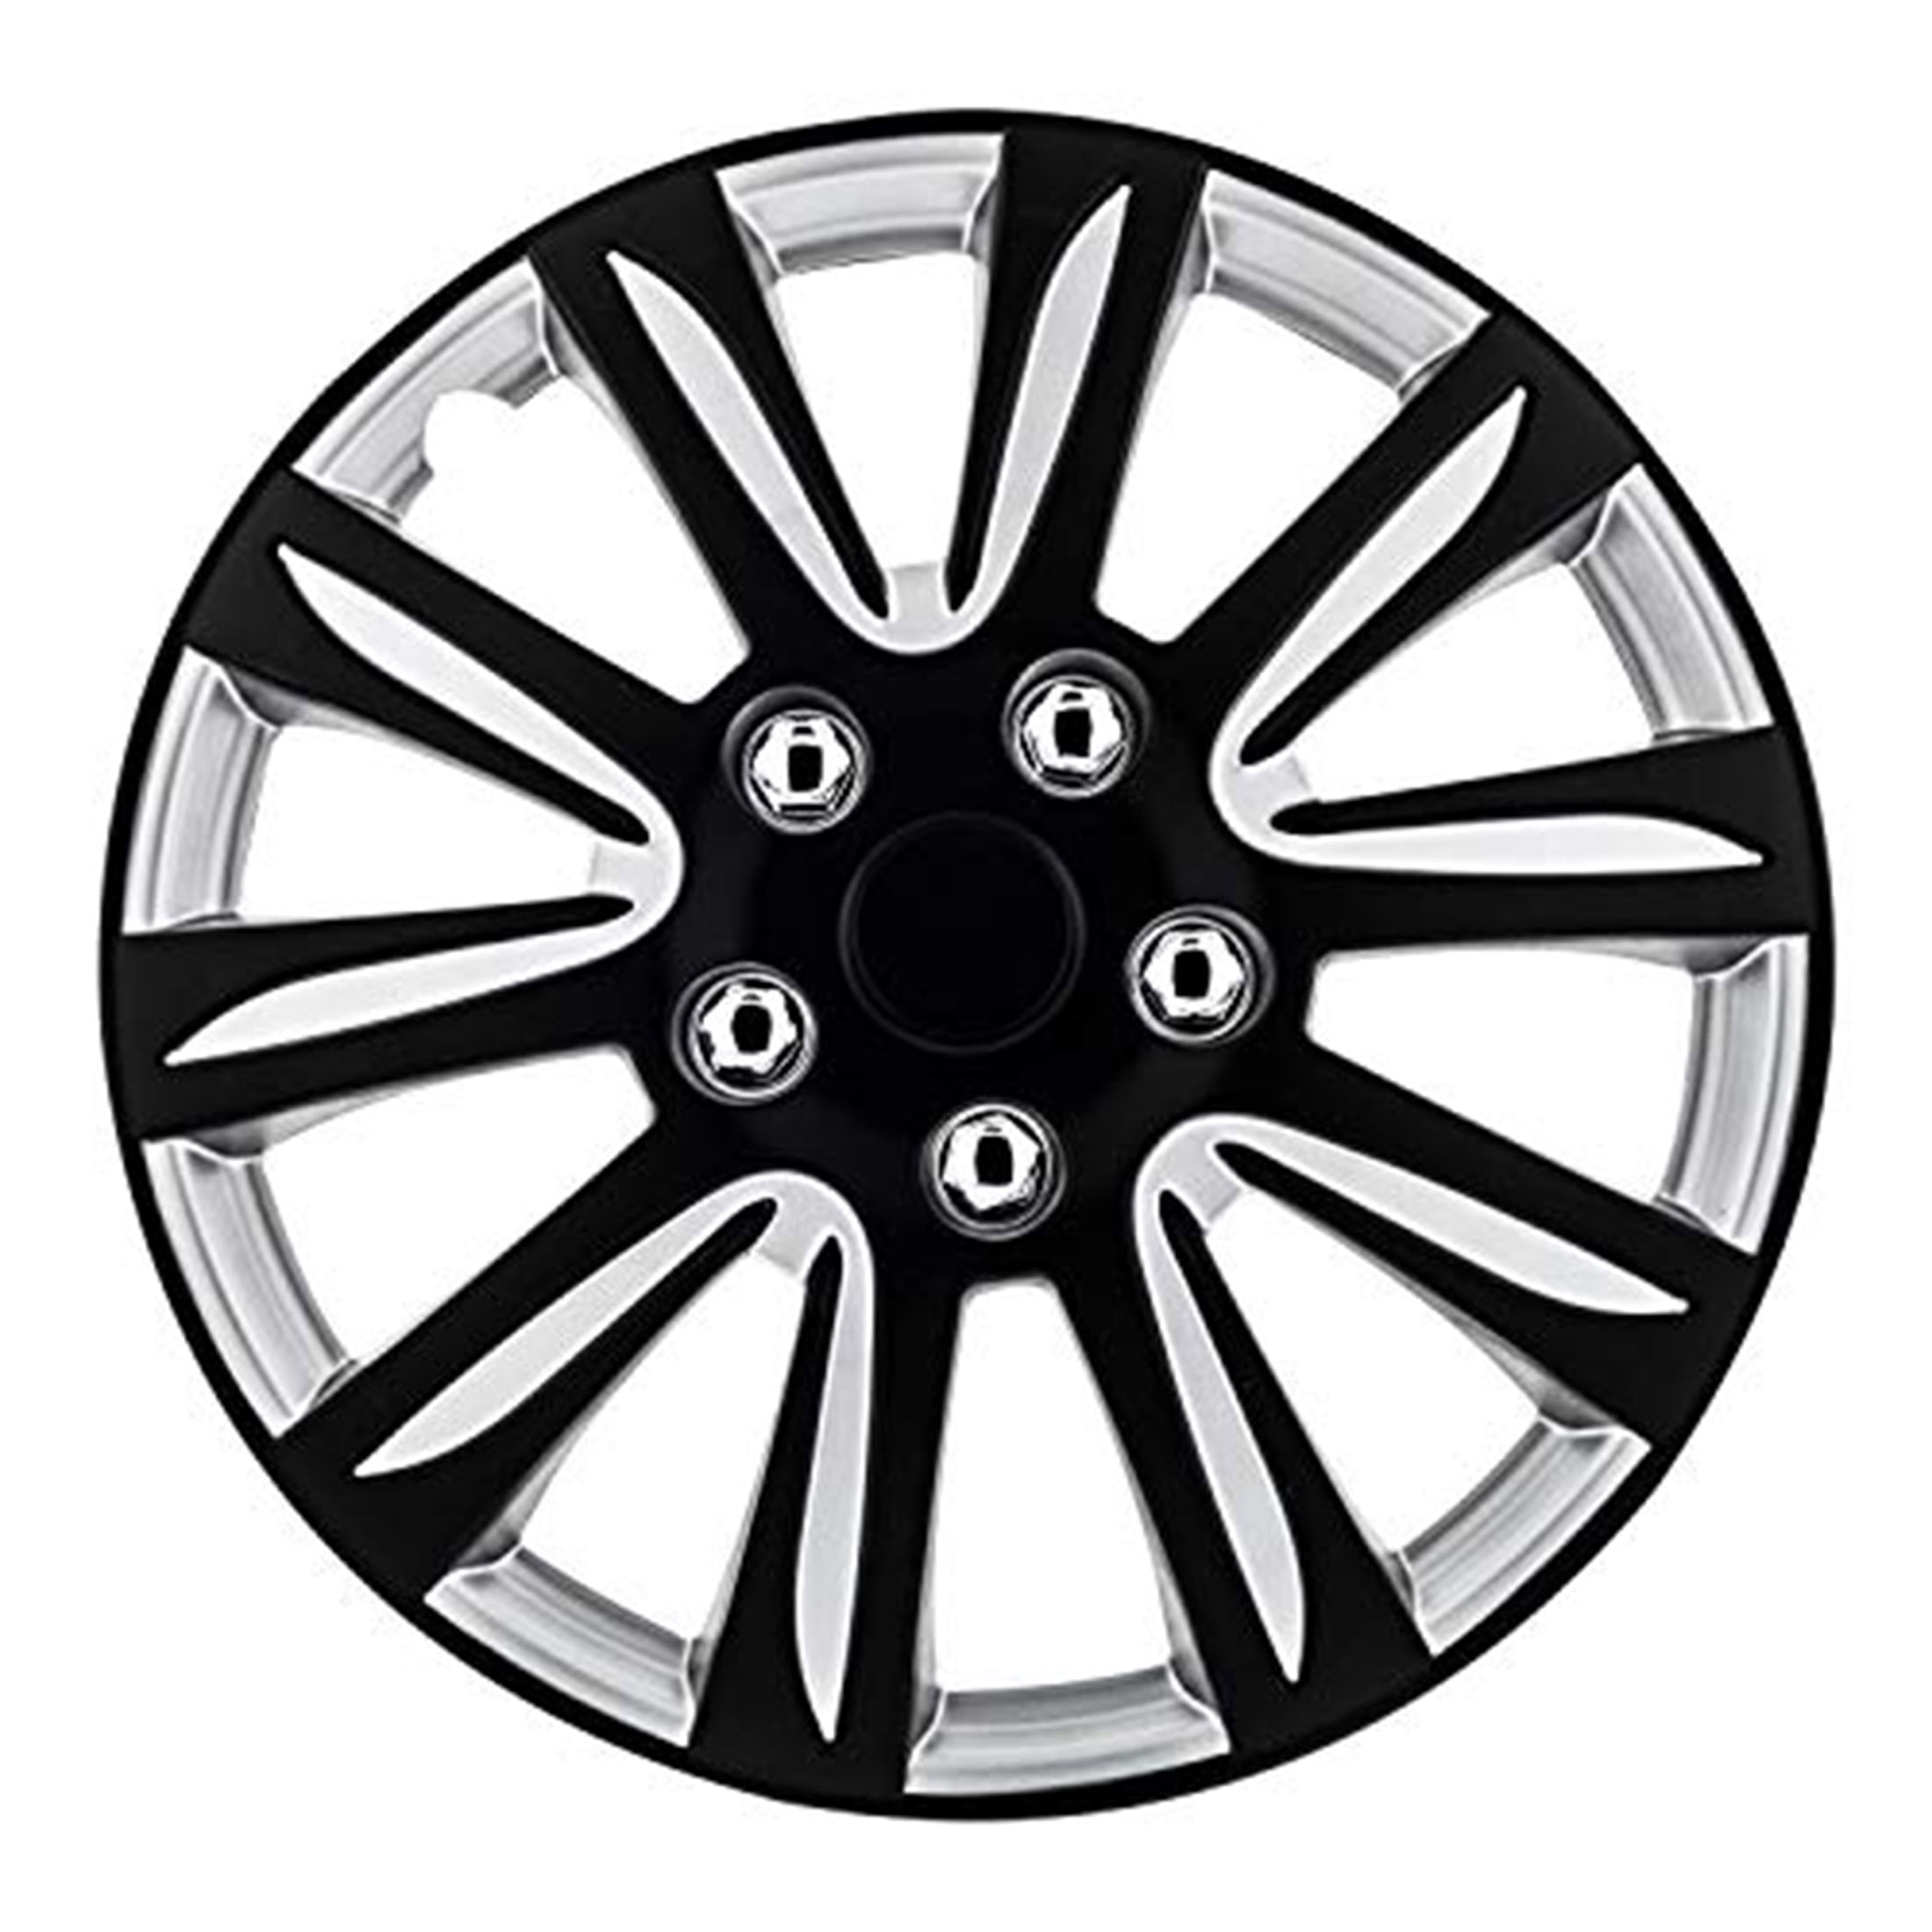 Deluxe Gloss Black 16in Wheel Cover Hubcaps ABS for Monte Carlo Style Look